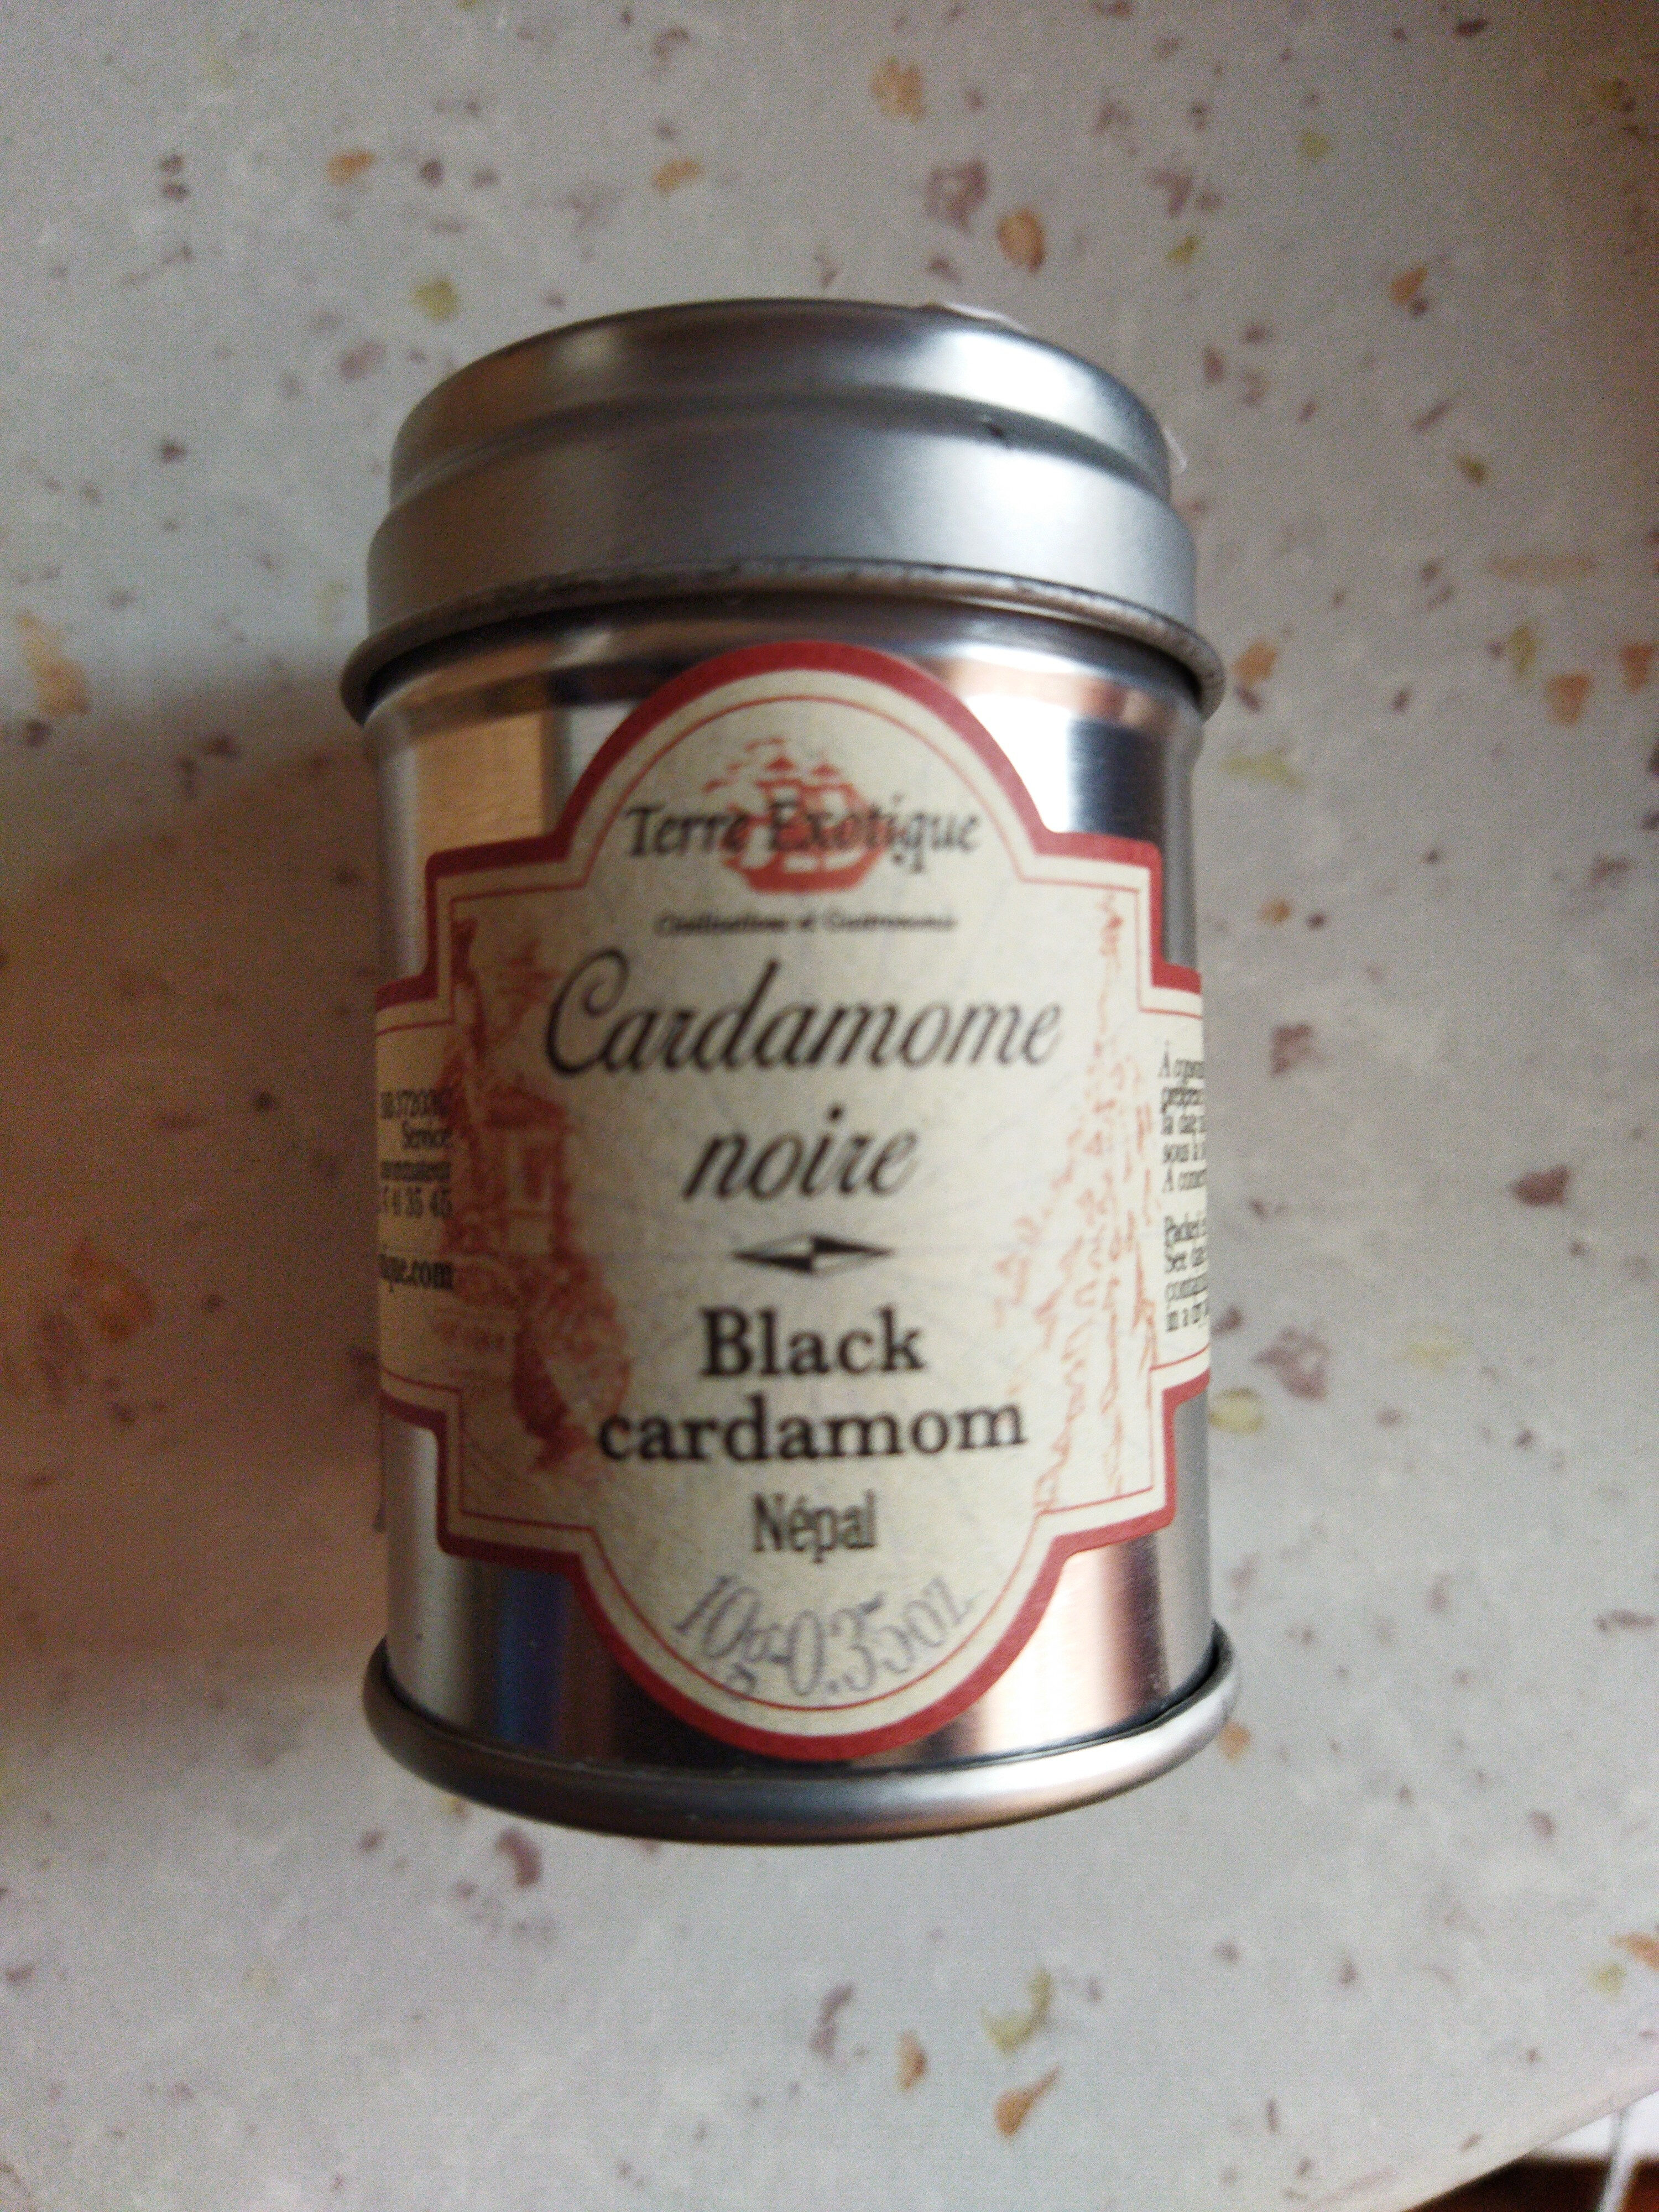 cardamome noire - Product - fr